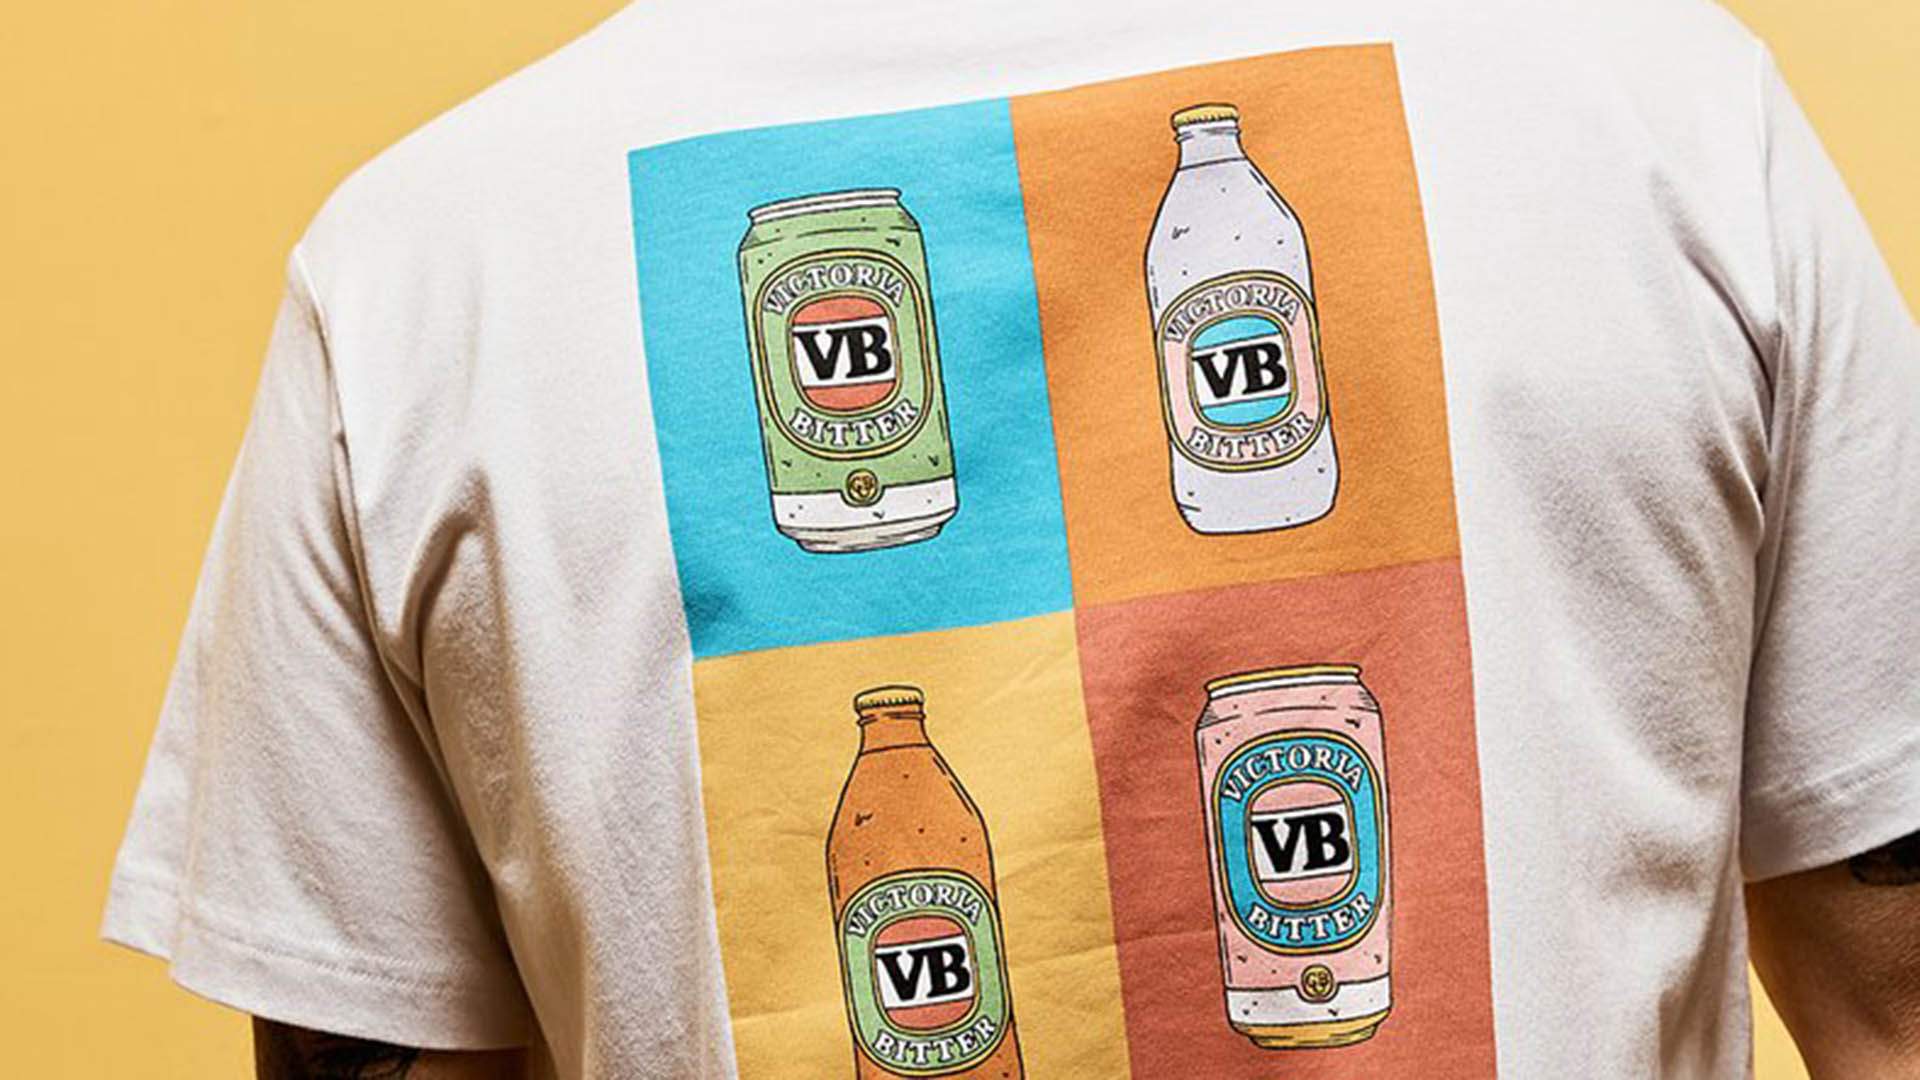 Victoria Bitter Has Teamed Up With Mr Simple on a New Line of Pop Art-Inspired Clothing and Merch